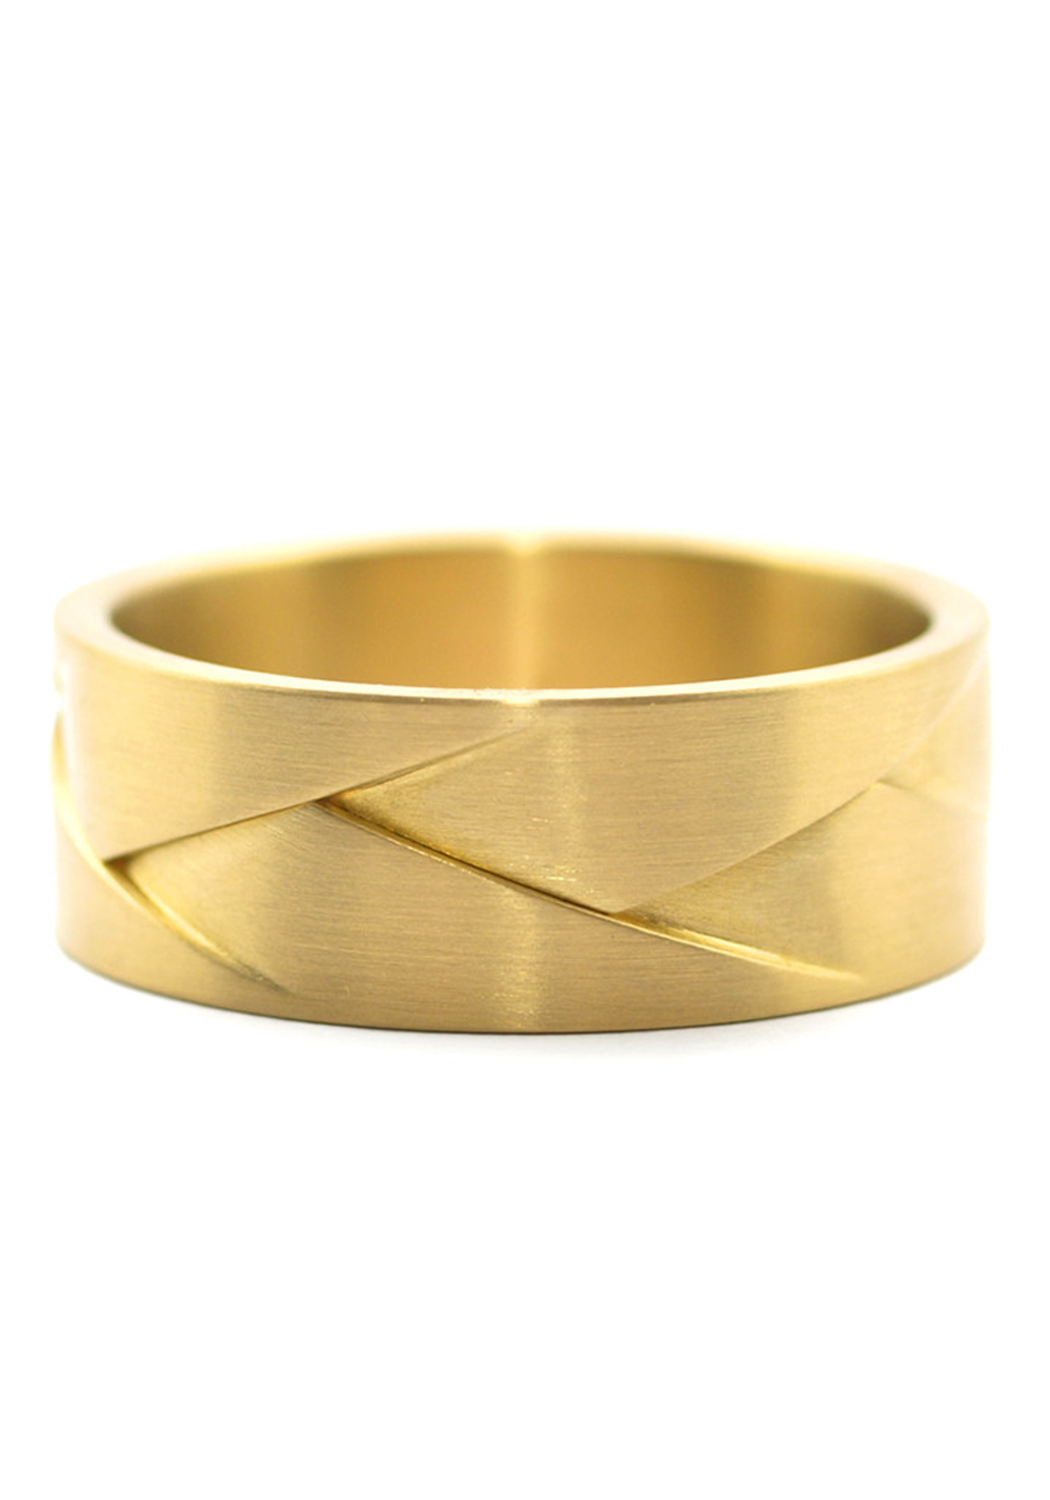 Furrer Jacot 18K Yellow Gold Origami Braided Band | OsterJewelers.com